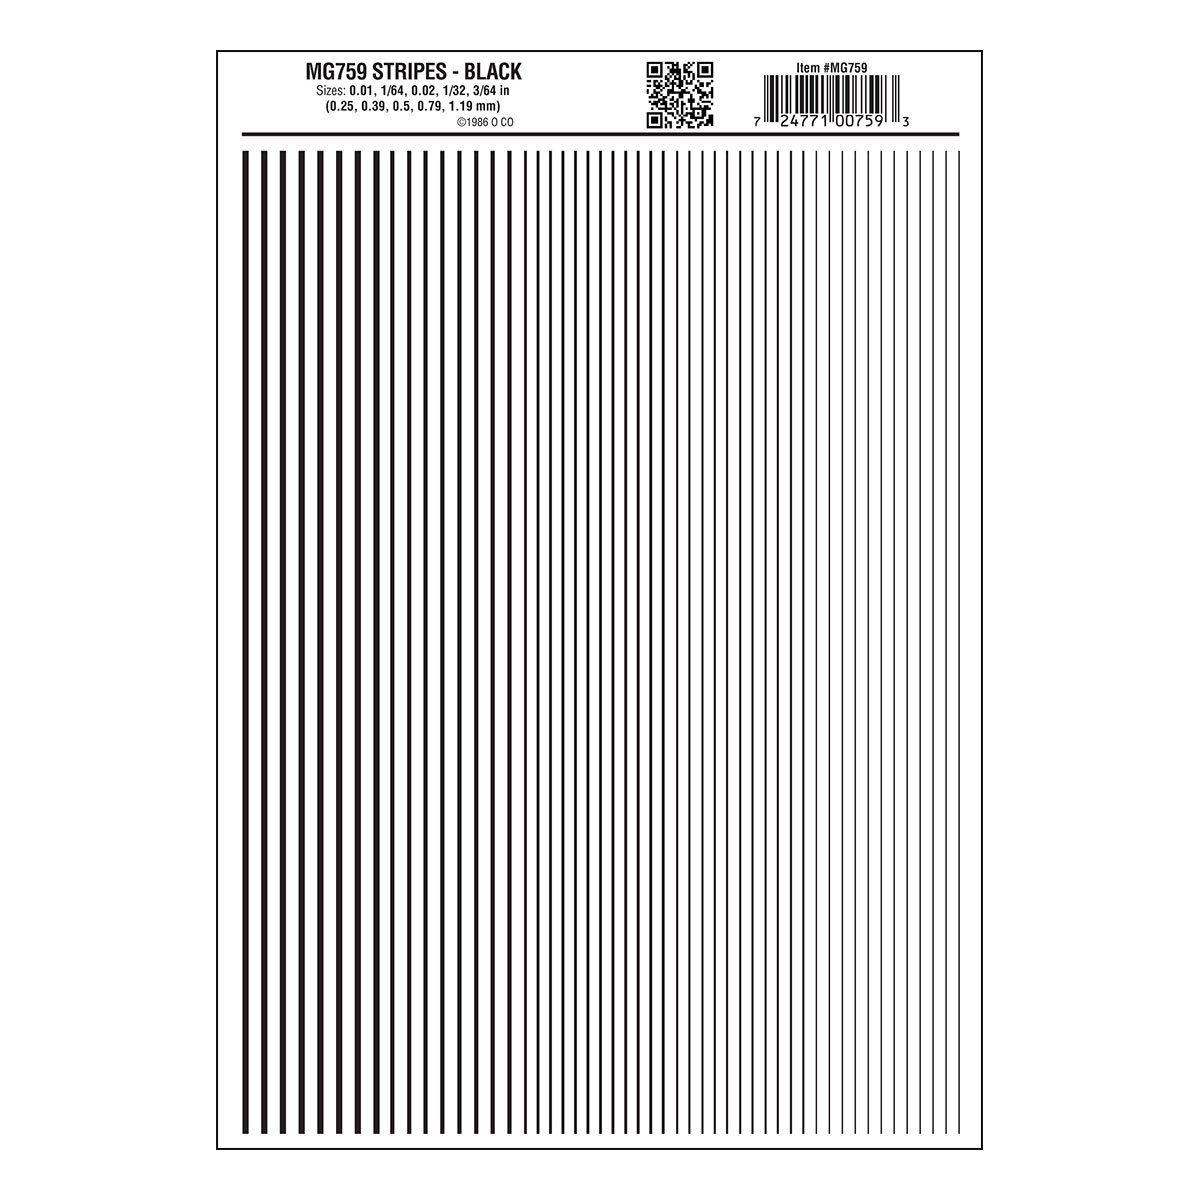 Stripes Black - Package contains one sheet: 5 3/4" x 8 1/4" (14